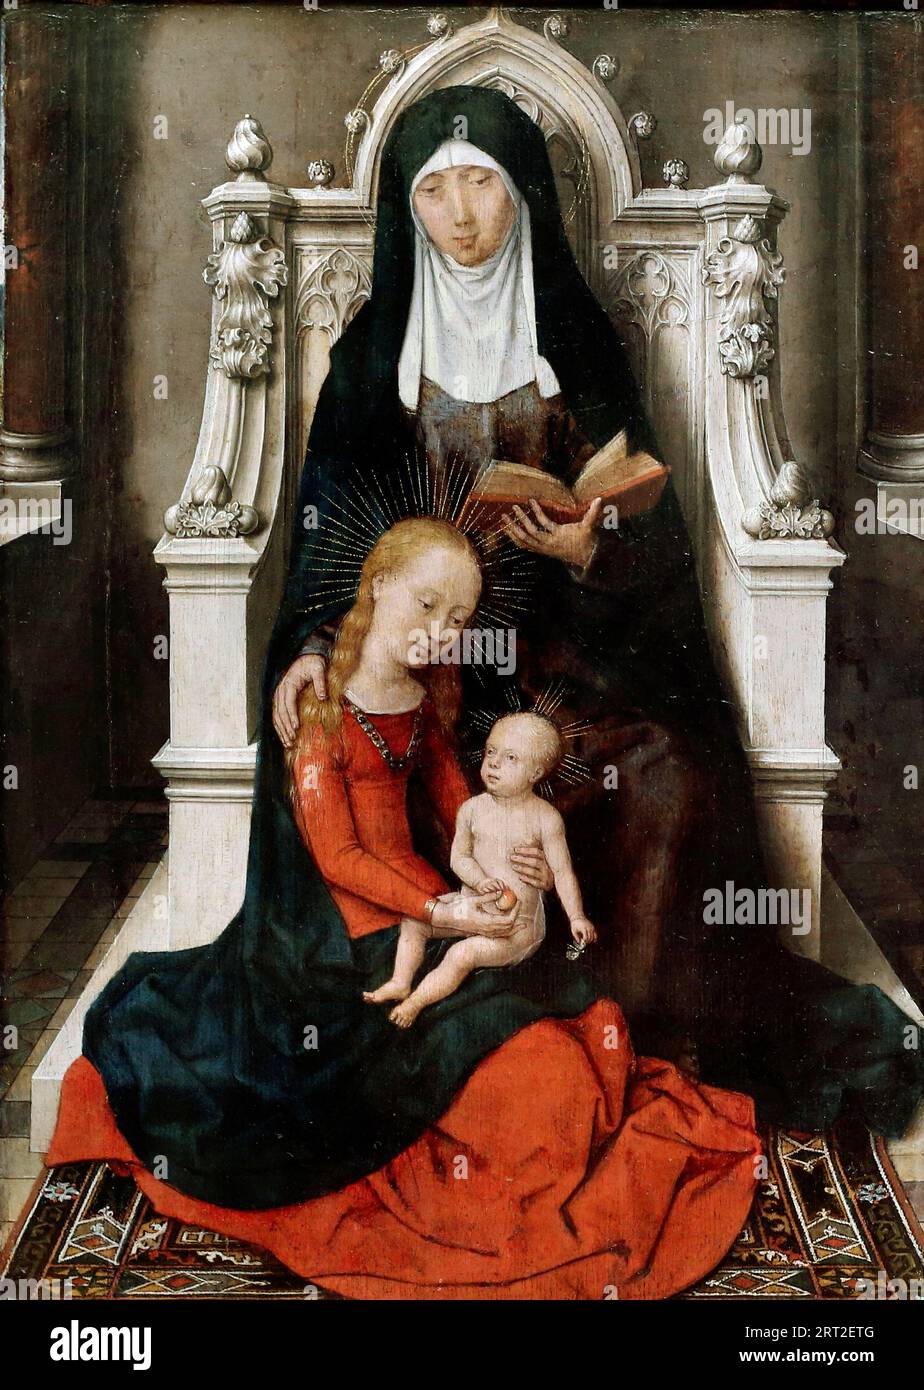 Panel of a diptych: The Virgin and Child with Saint Anne, c.1480. Found in the collection of the Alte Pinakothek, Munich. Stock Photo